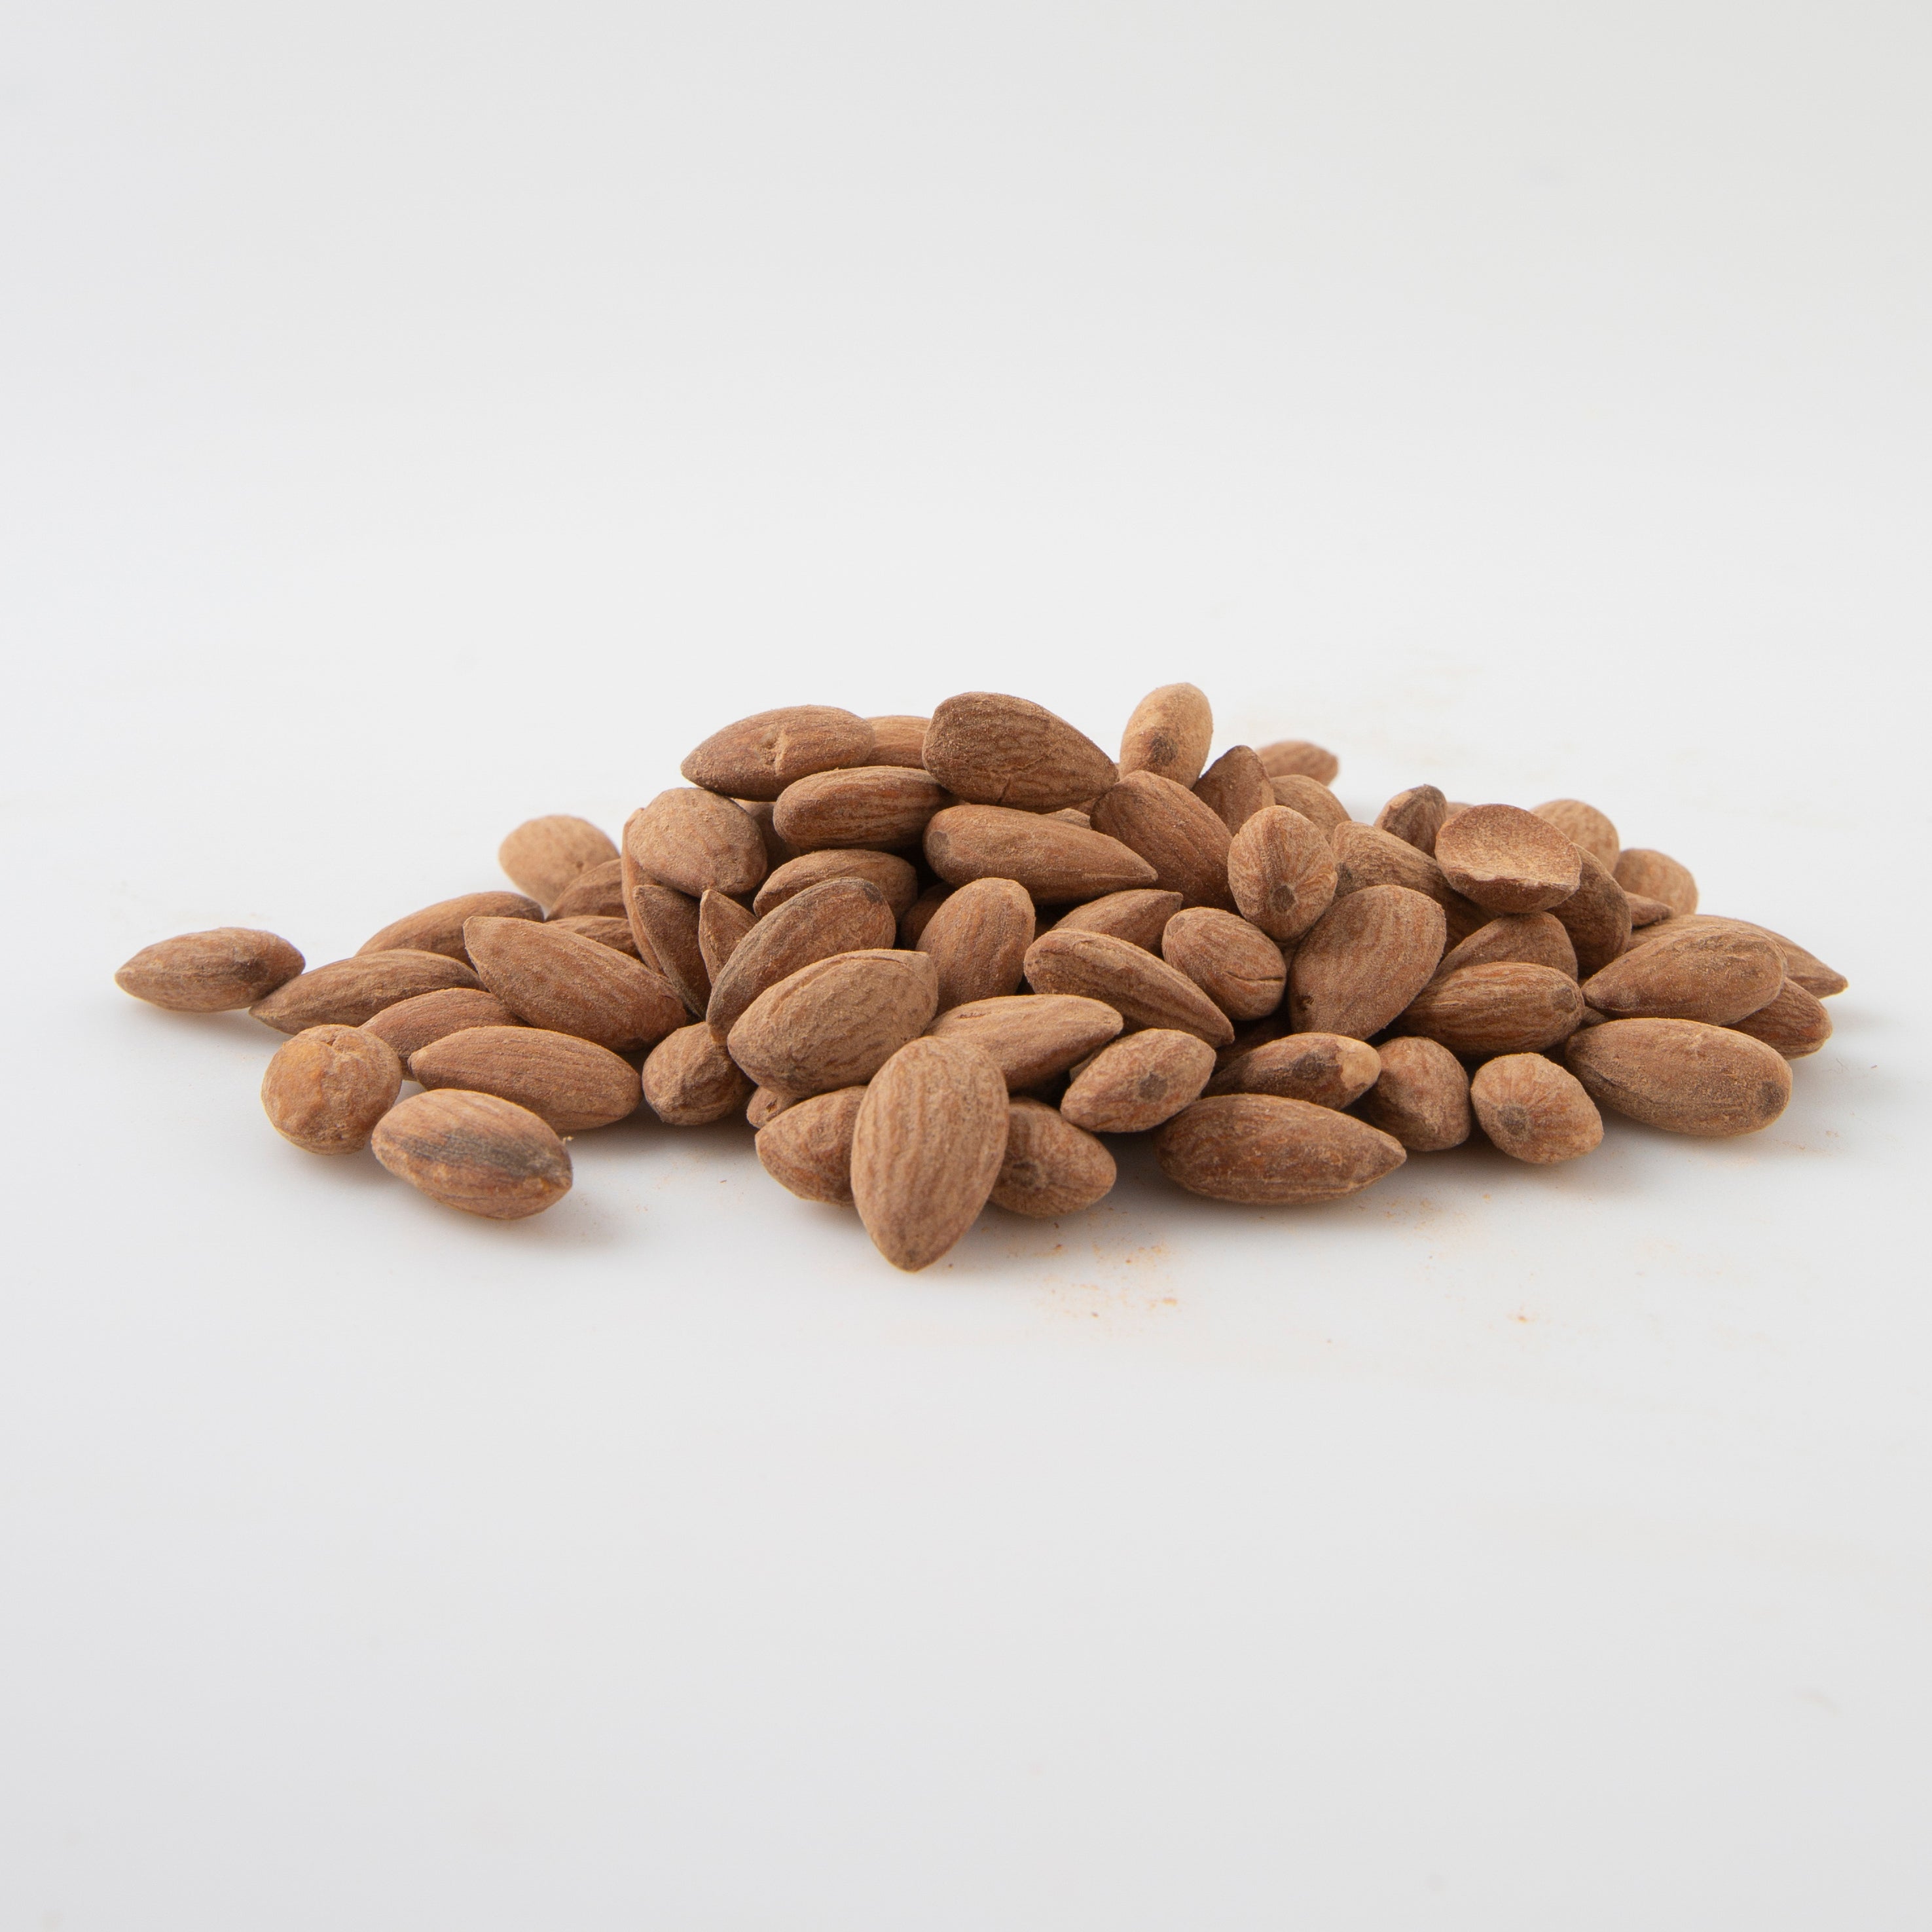 Roasted Salted Almonds (Roasted Nuts) Image 1 - Naked Foods